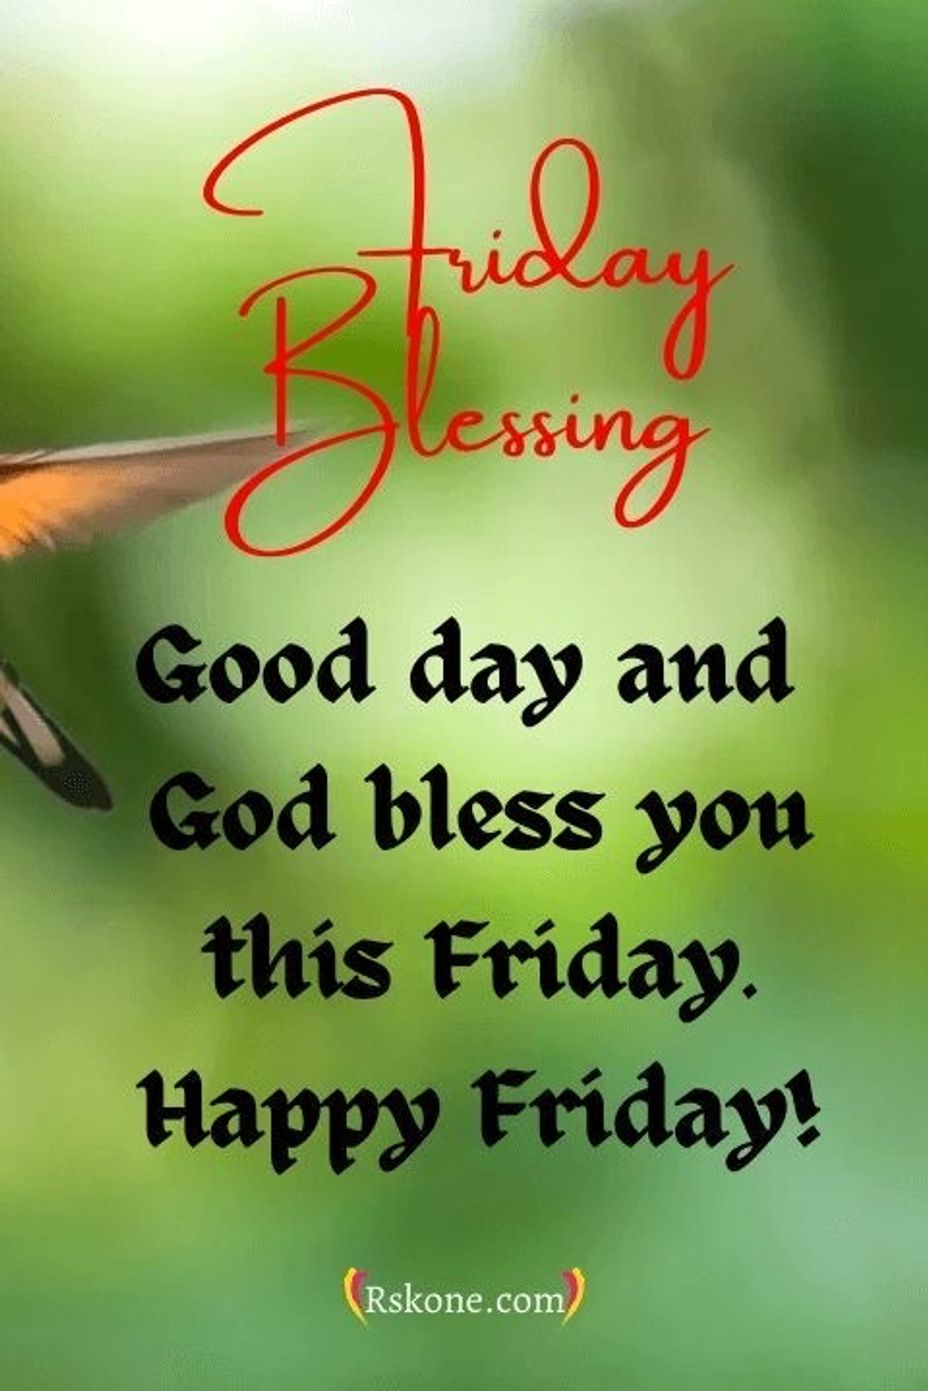 <p>Good Friday Wishes. <a class="tm-topic-link ugc-topic" title="goodfriday" href="/topic/goodfriday/" data-id="5cb9ffb5dc0bb800d234b8d2" data-name="goodfriday" aria-label="hashtag goodfriday">#goodfriday</a> </p>